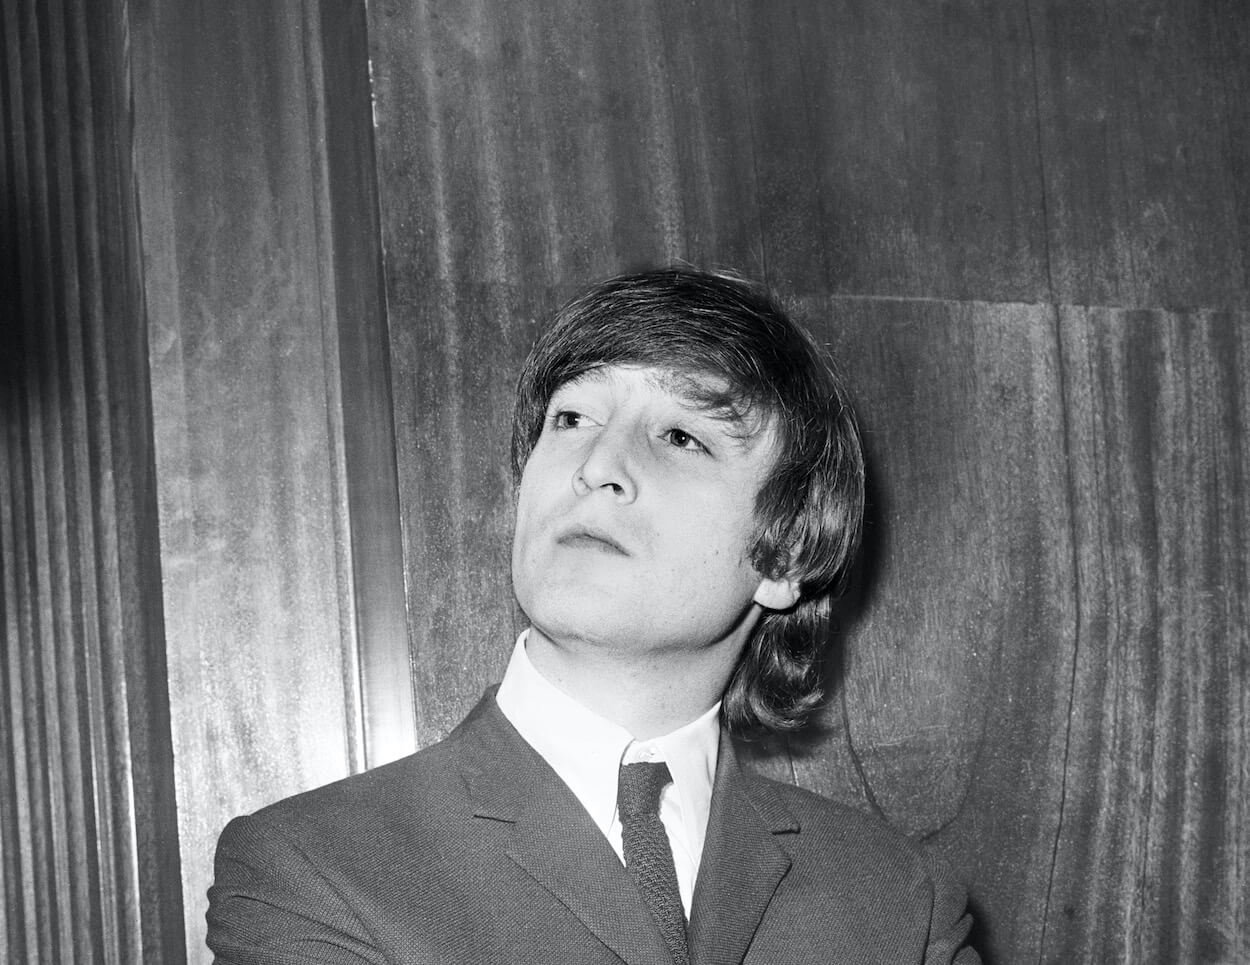 Beatles member John Lennon looking to his right while wearing a suit during a pre-concert press conference in 1964.